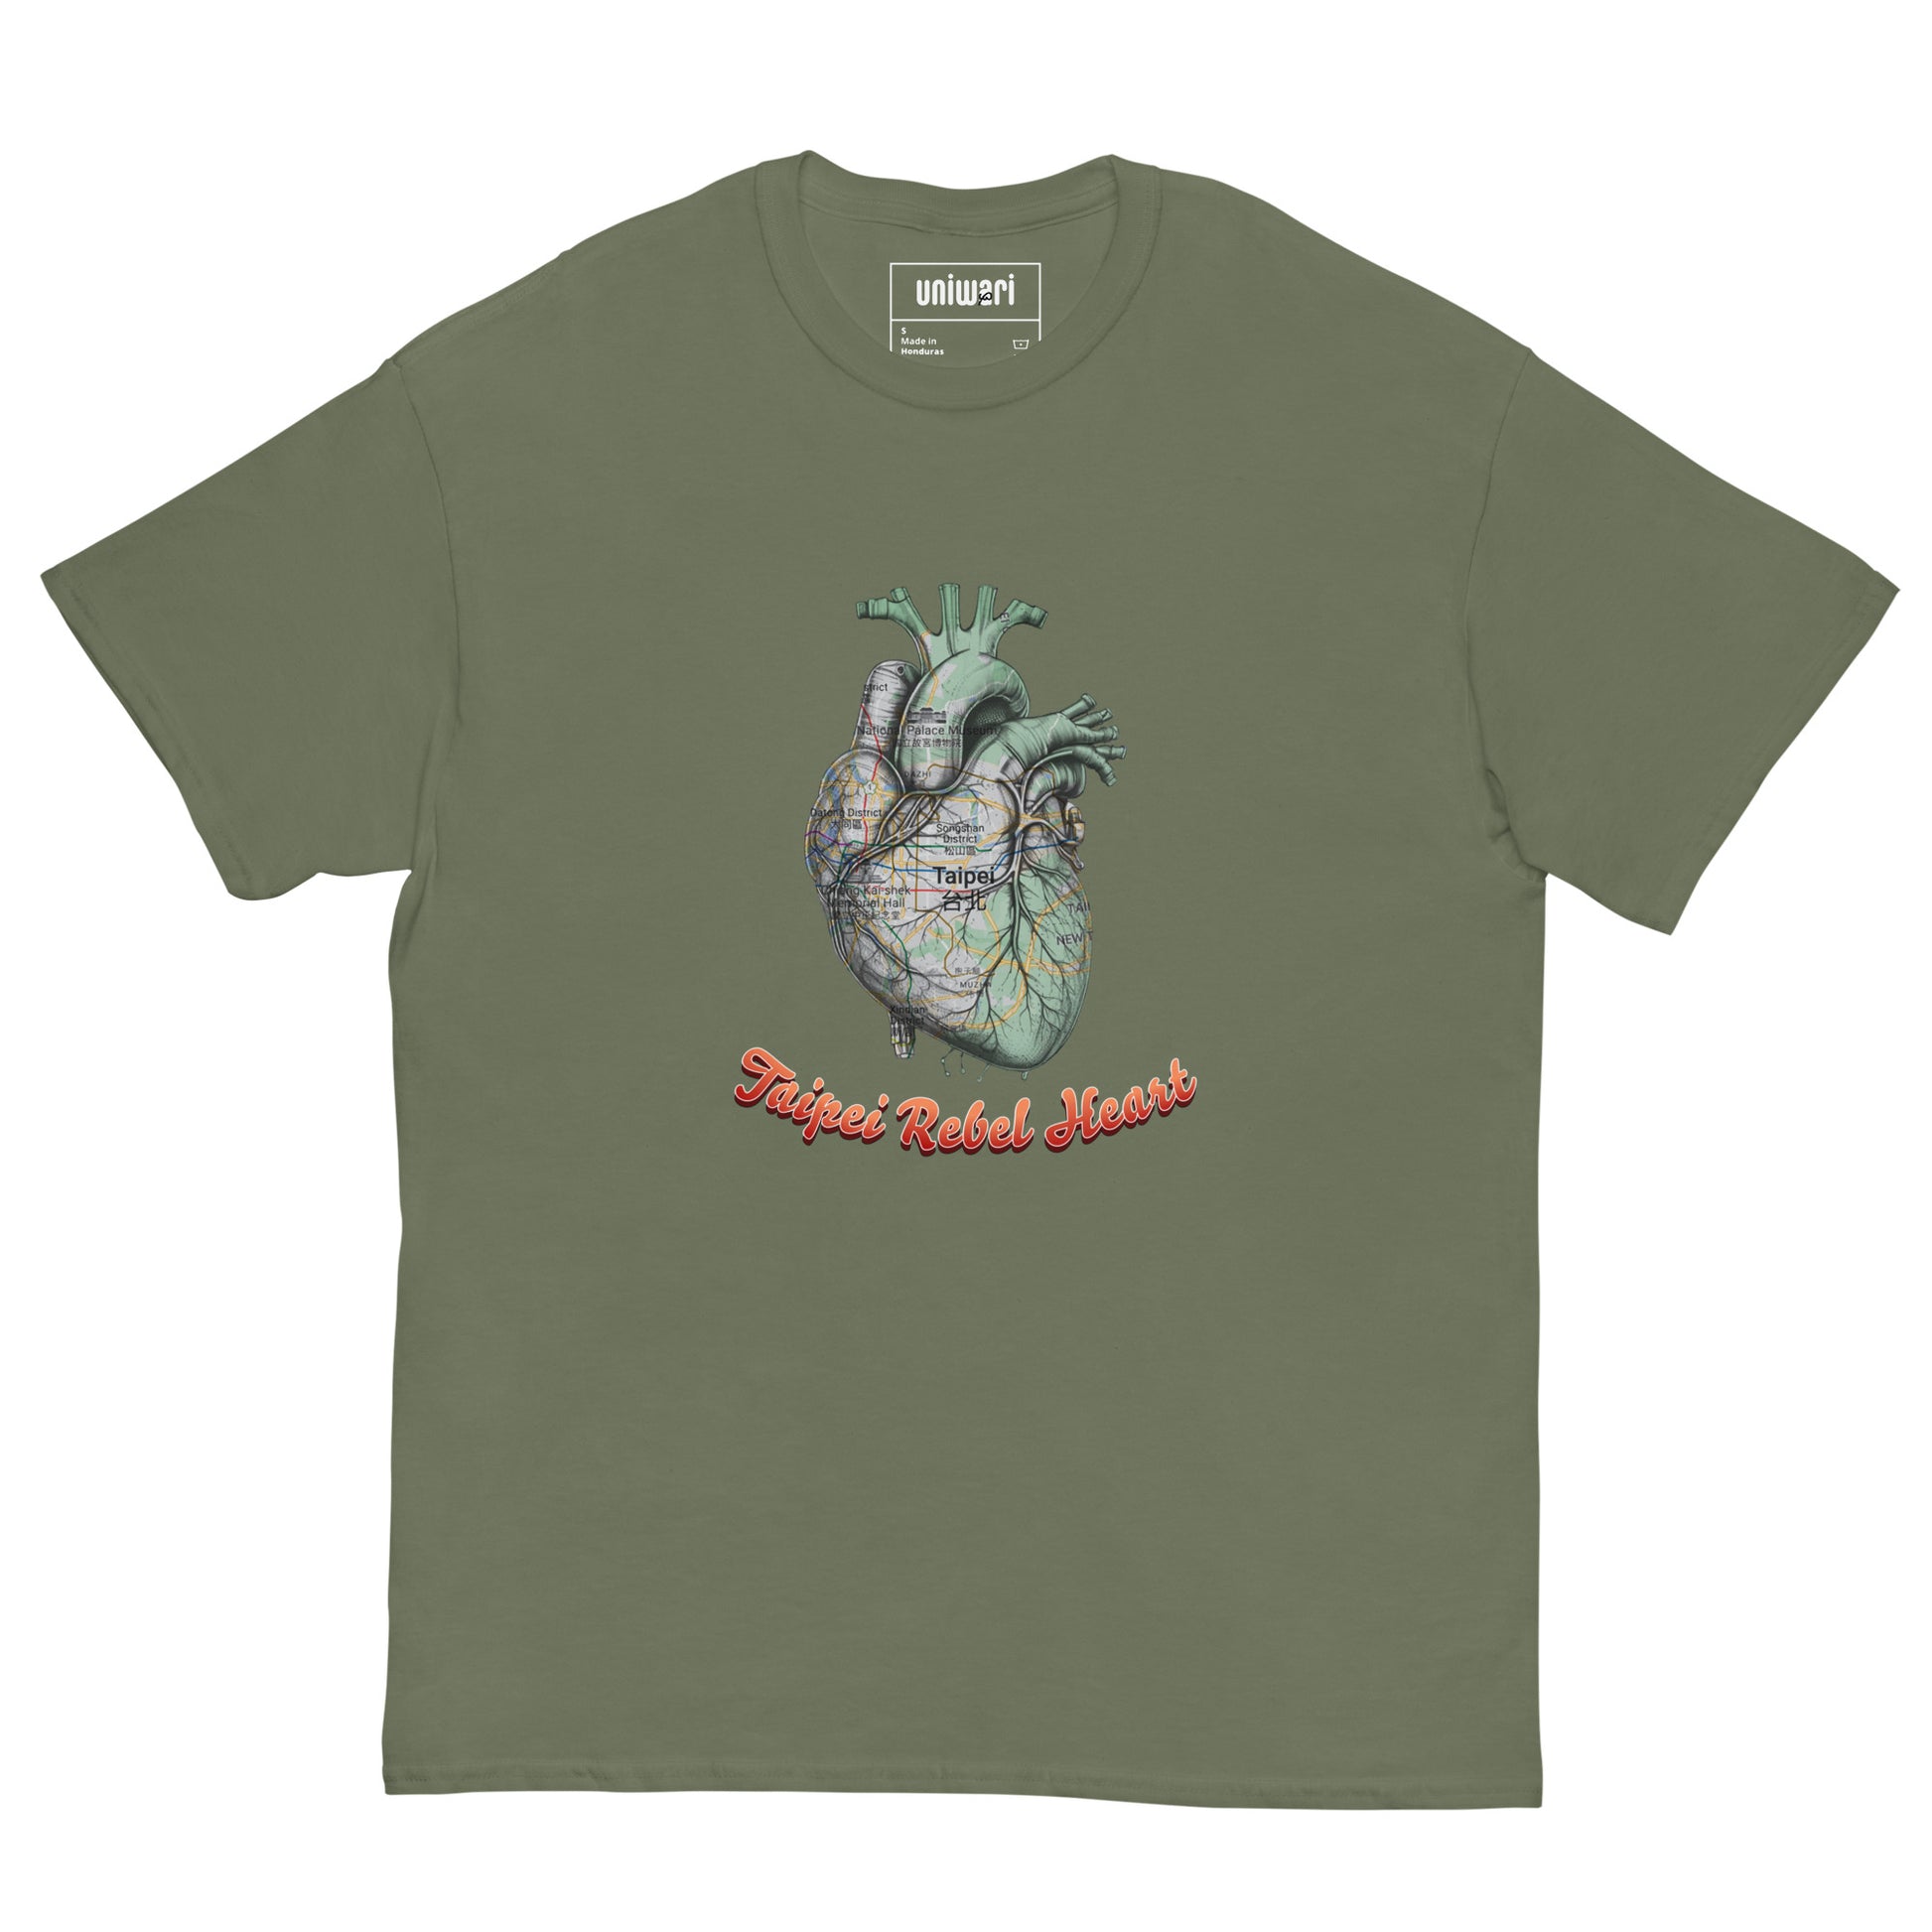 Green High Quality Tee - Front Design with a Heart Shaped Map of Taipei and a Phrase "Taipei Rebel Heart" print